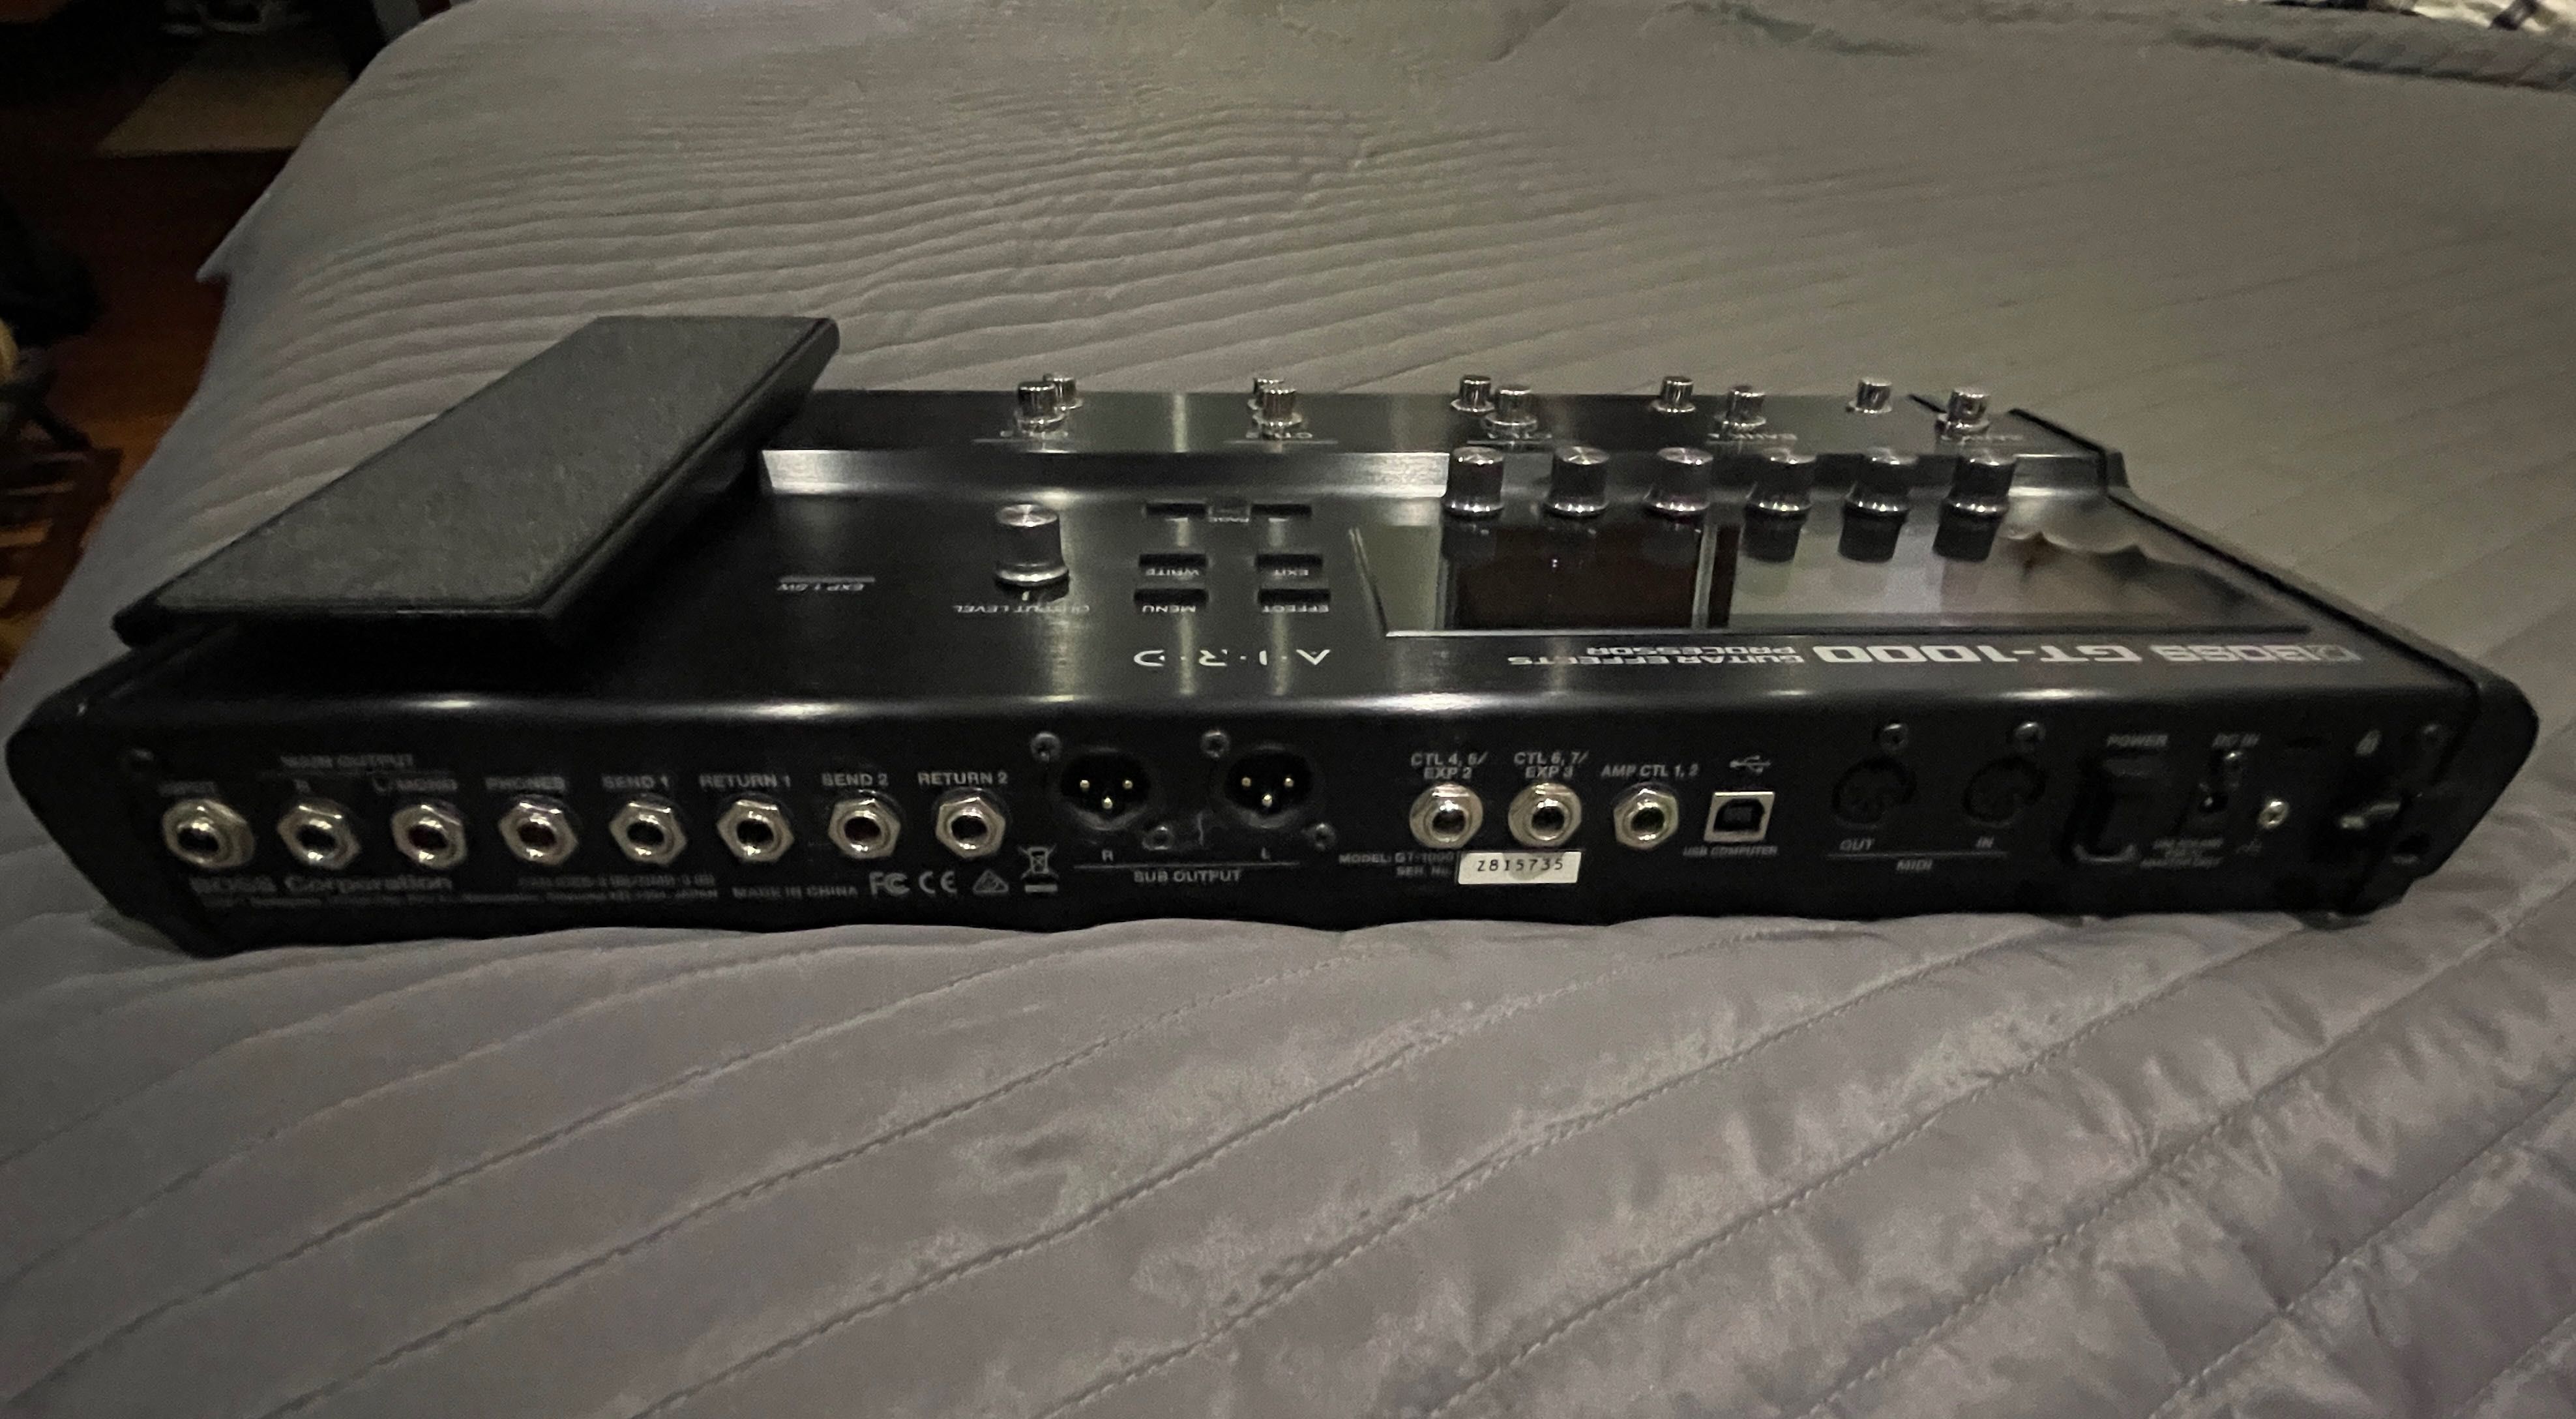 BOSS GT-1000 In Great Condition with Original Power Supply